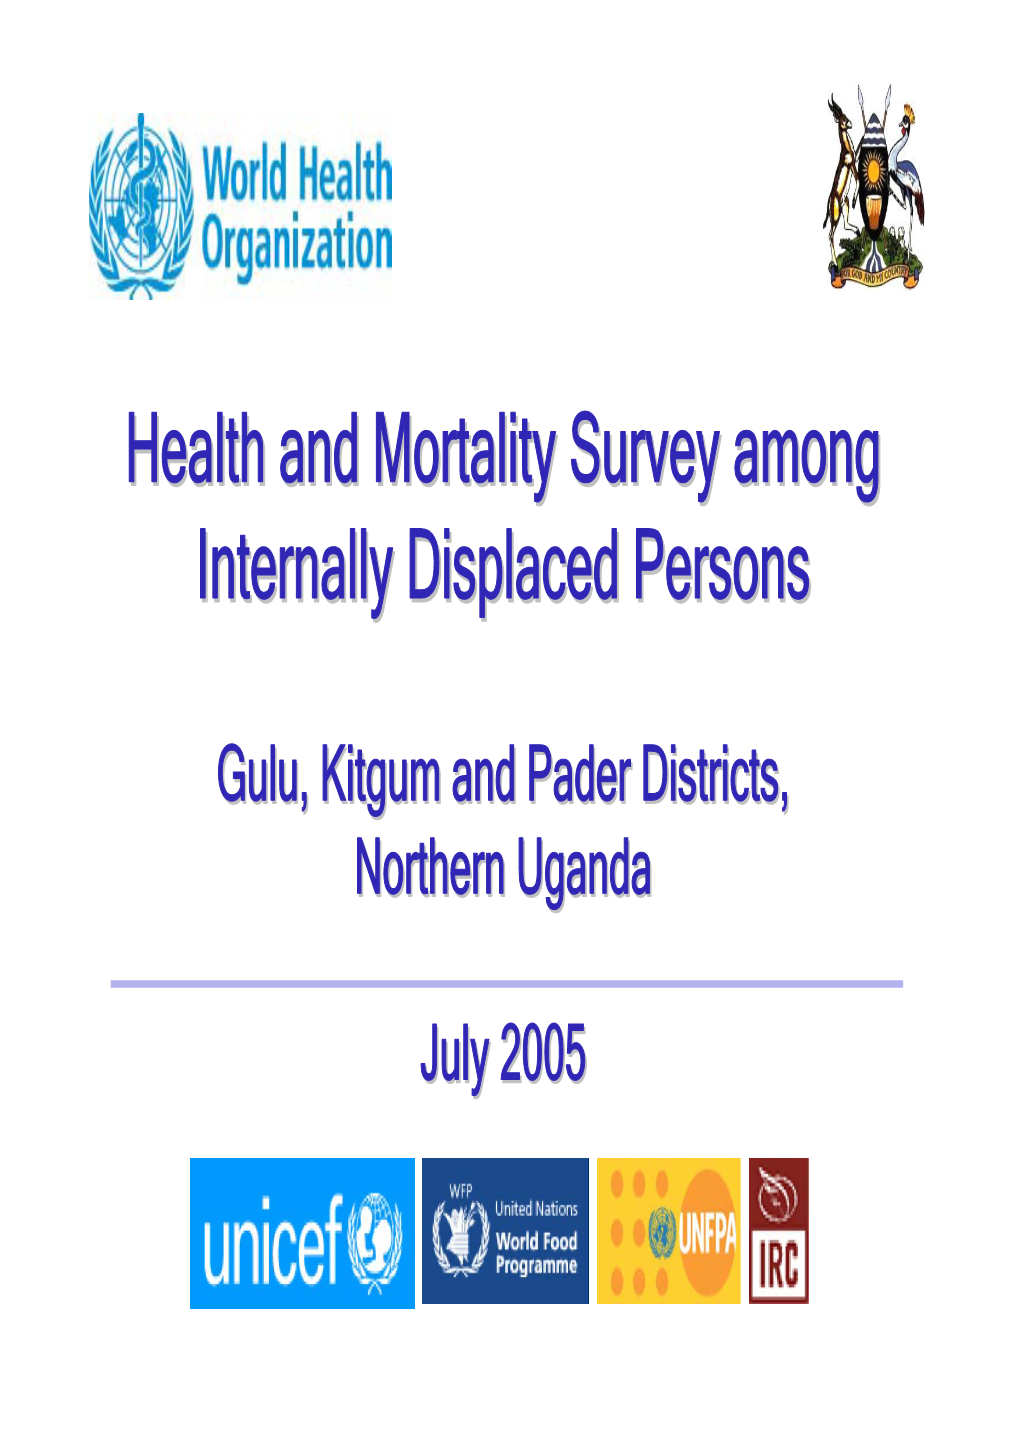 Health and Mortality Survey Among Internally Displaced Persons